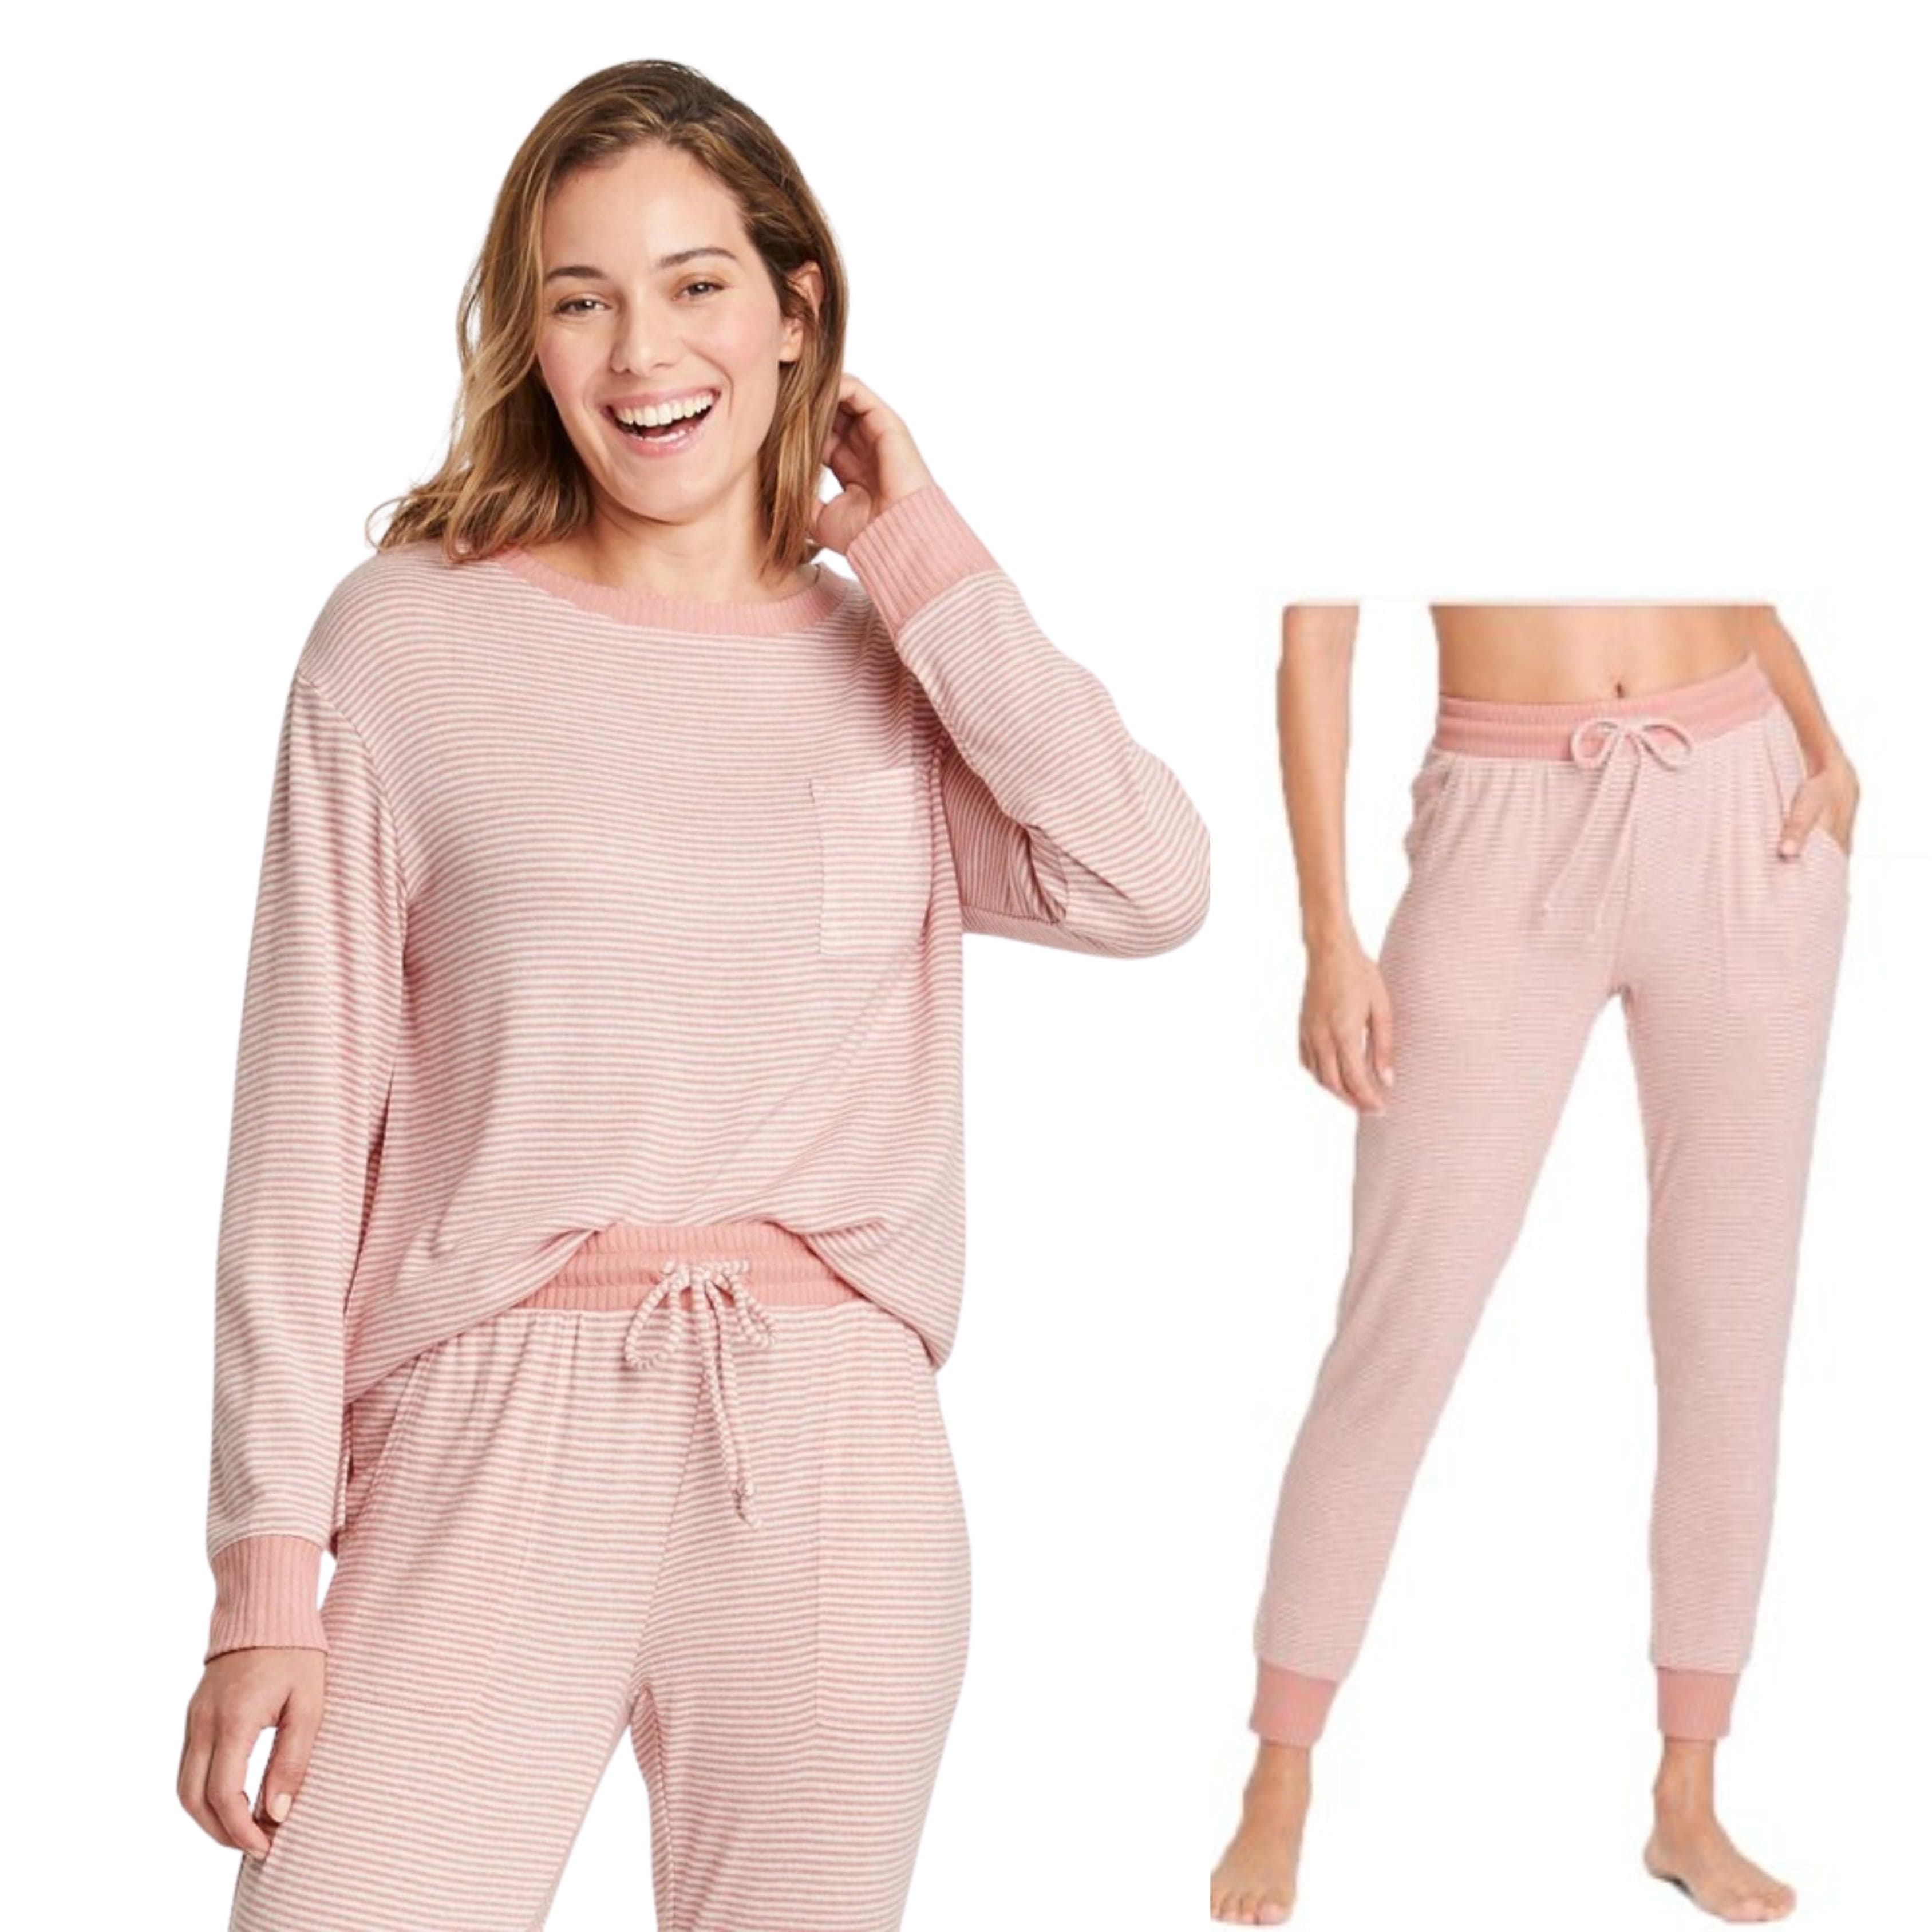 STARS ABOVE - Perfectly Cozy Striped Lounge Pajama Sets – Beyond